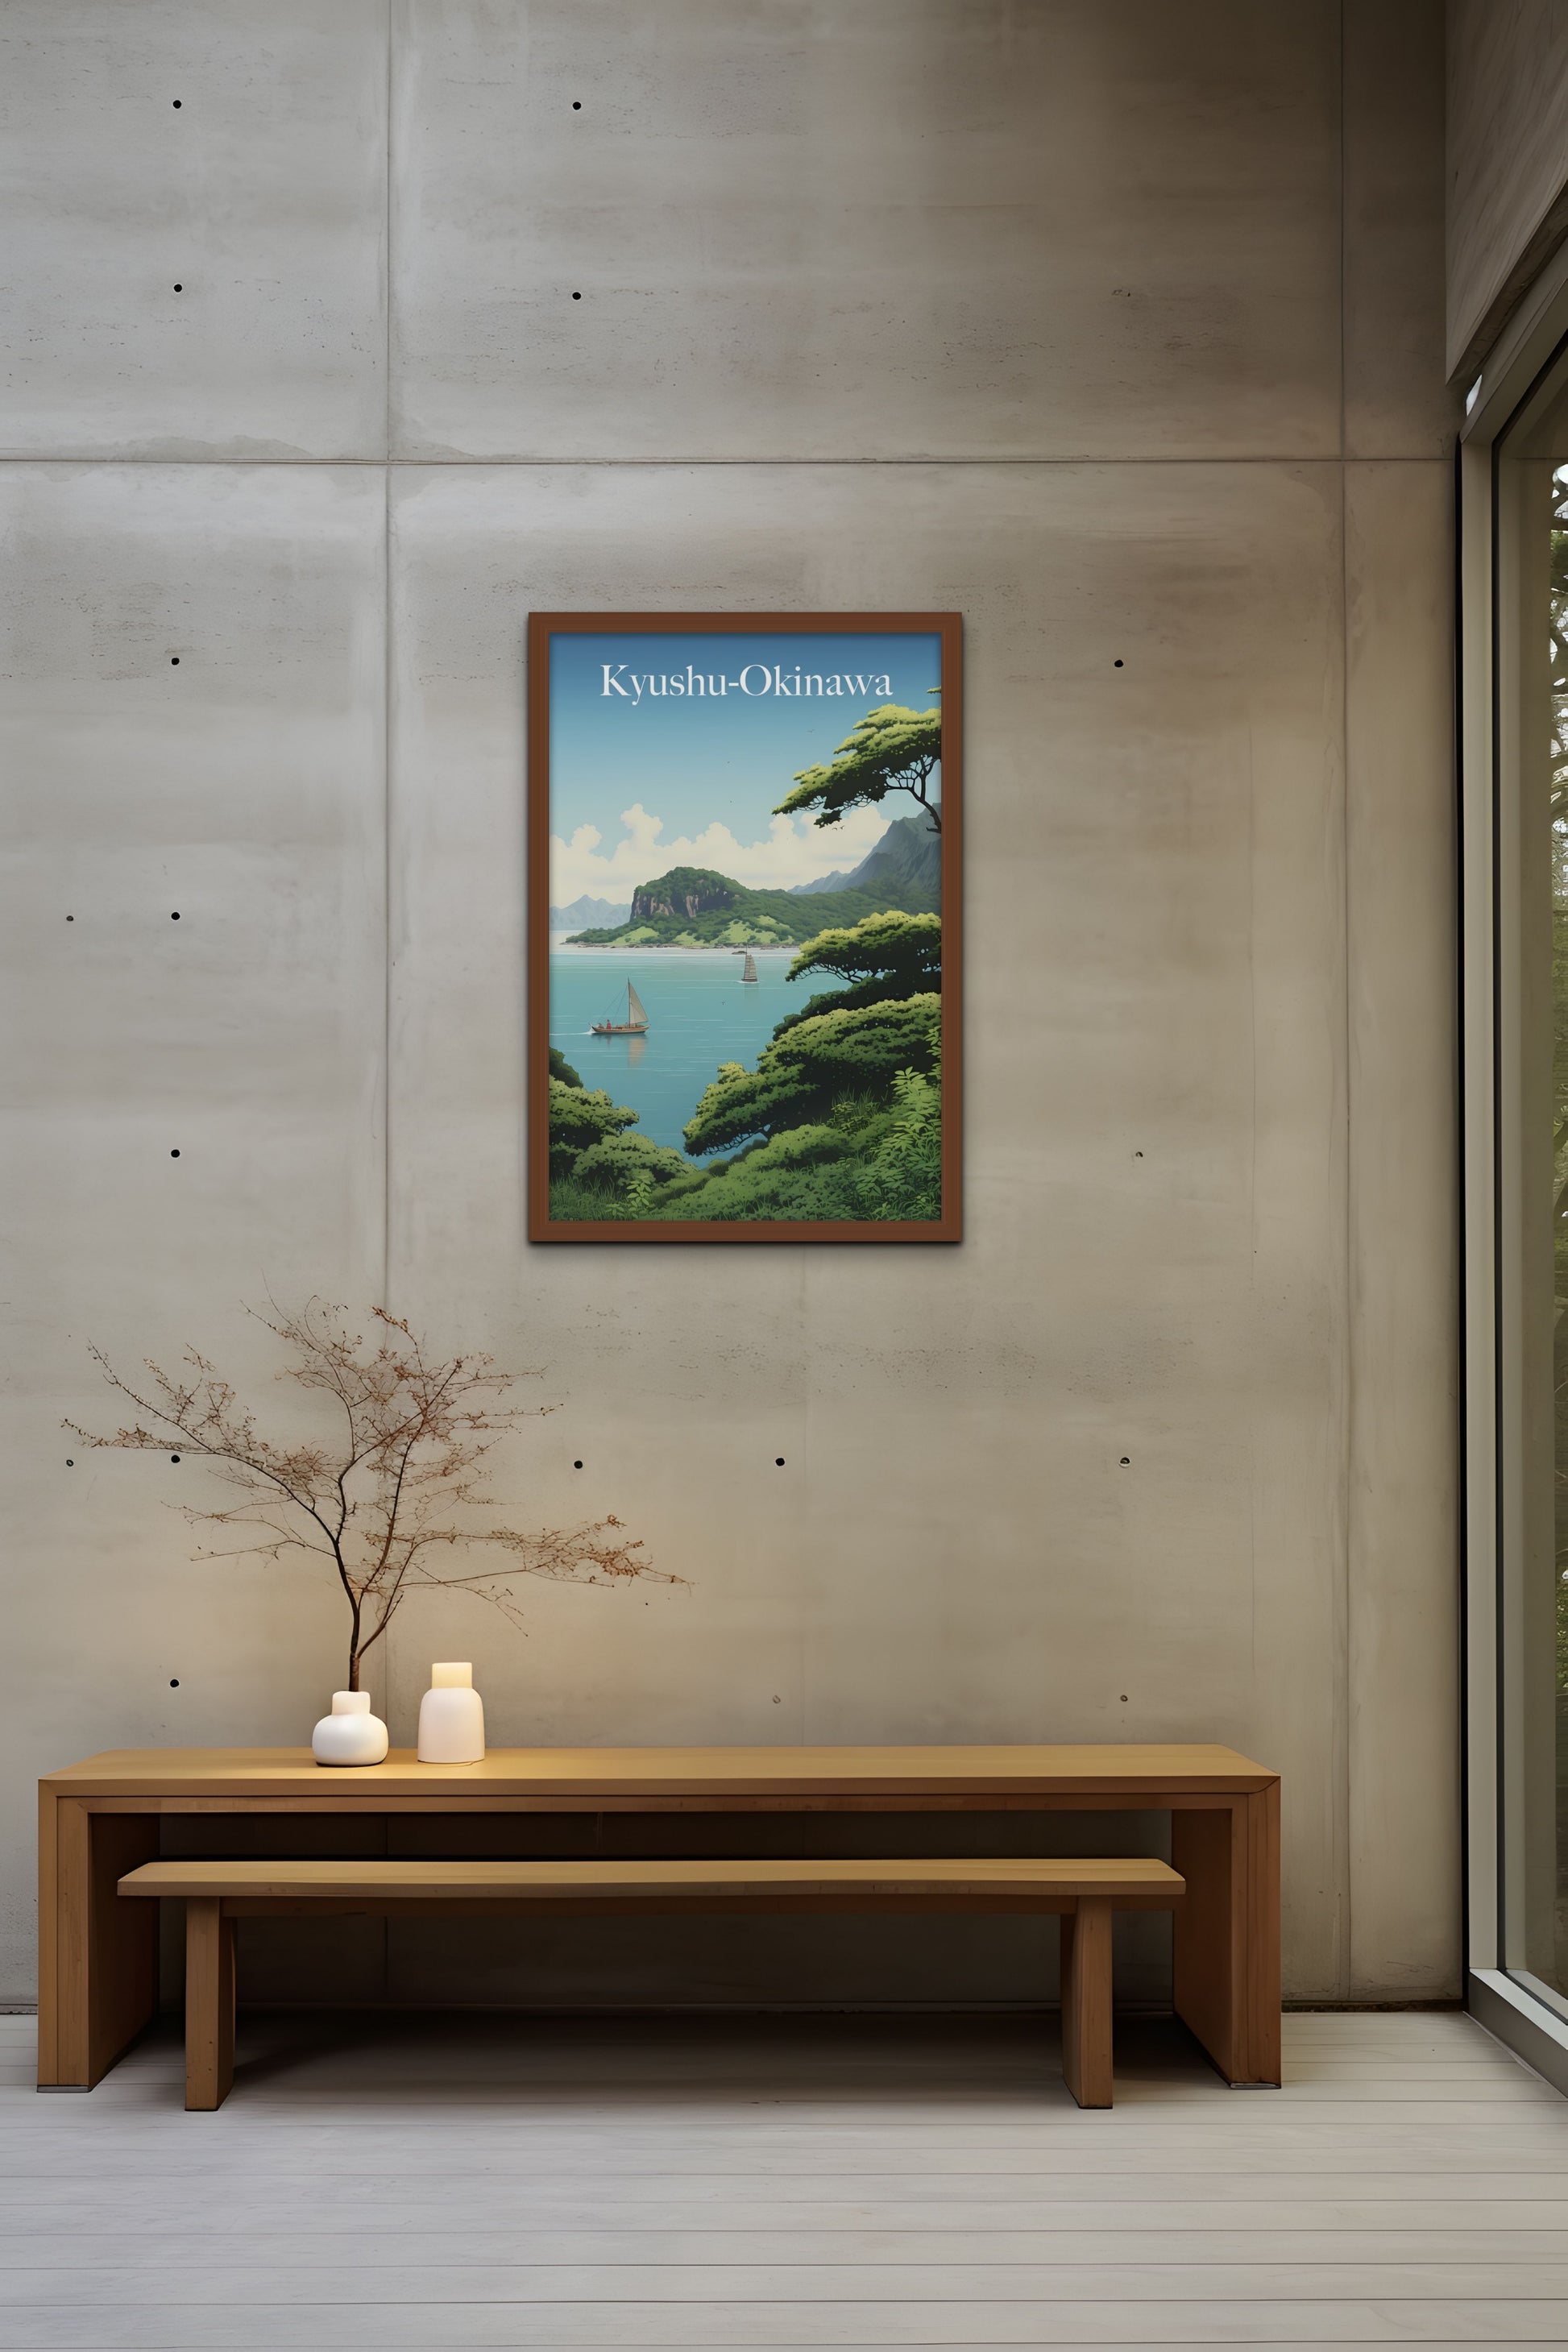 "Minimalist room with a bench, candles, and Kyushu-Okinawa painting on a concrete wall."